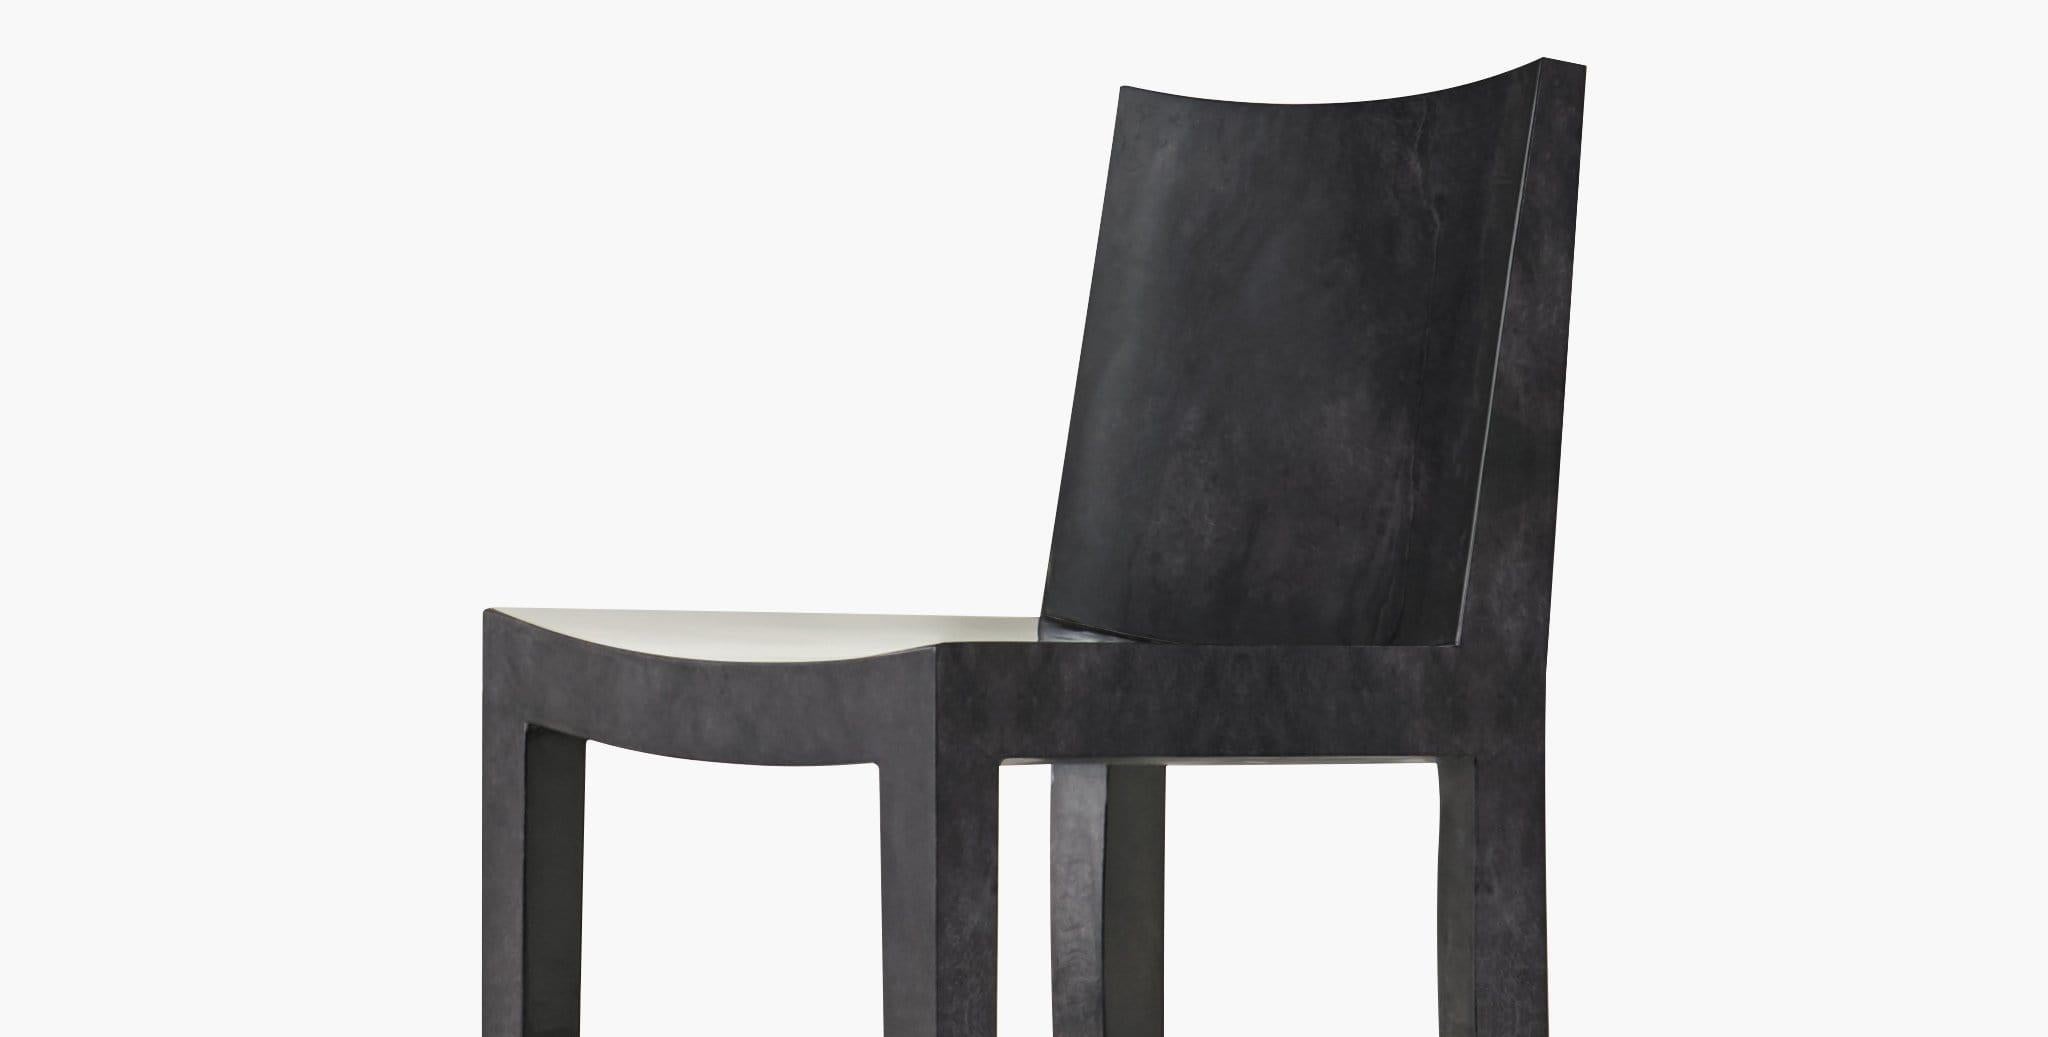 Ben Soleimani Pergamo Bar Stool in Carbon Parchment In New Condition For Sale In West Hollywood, CA